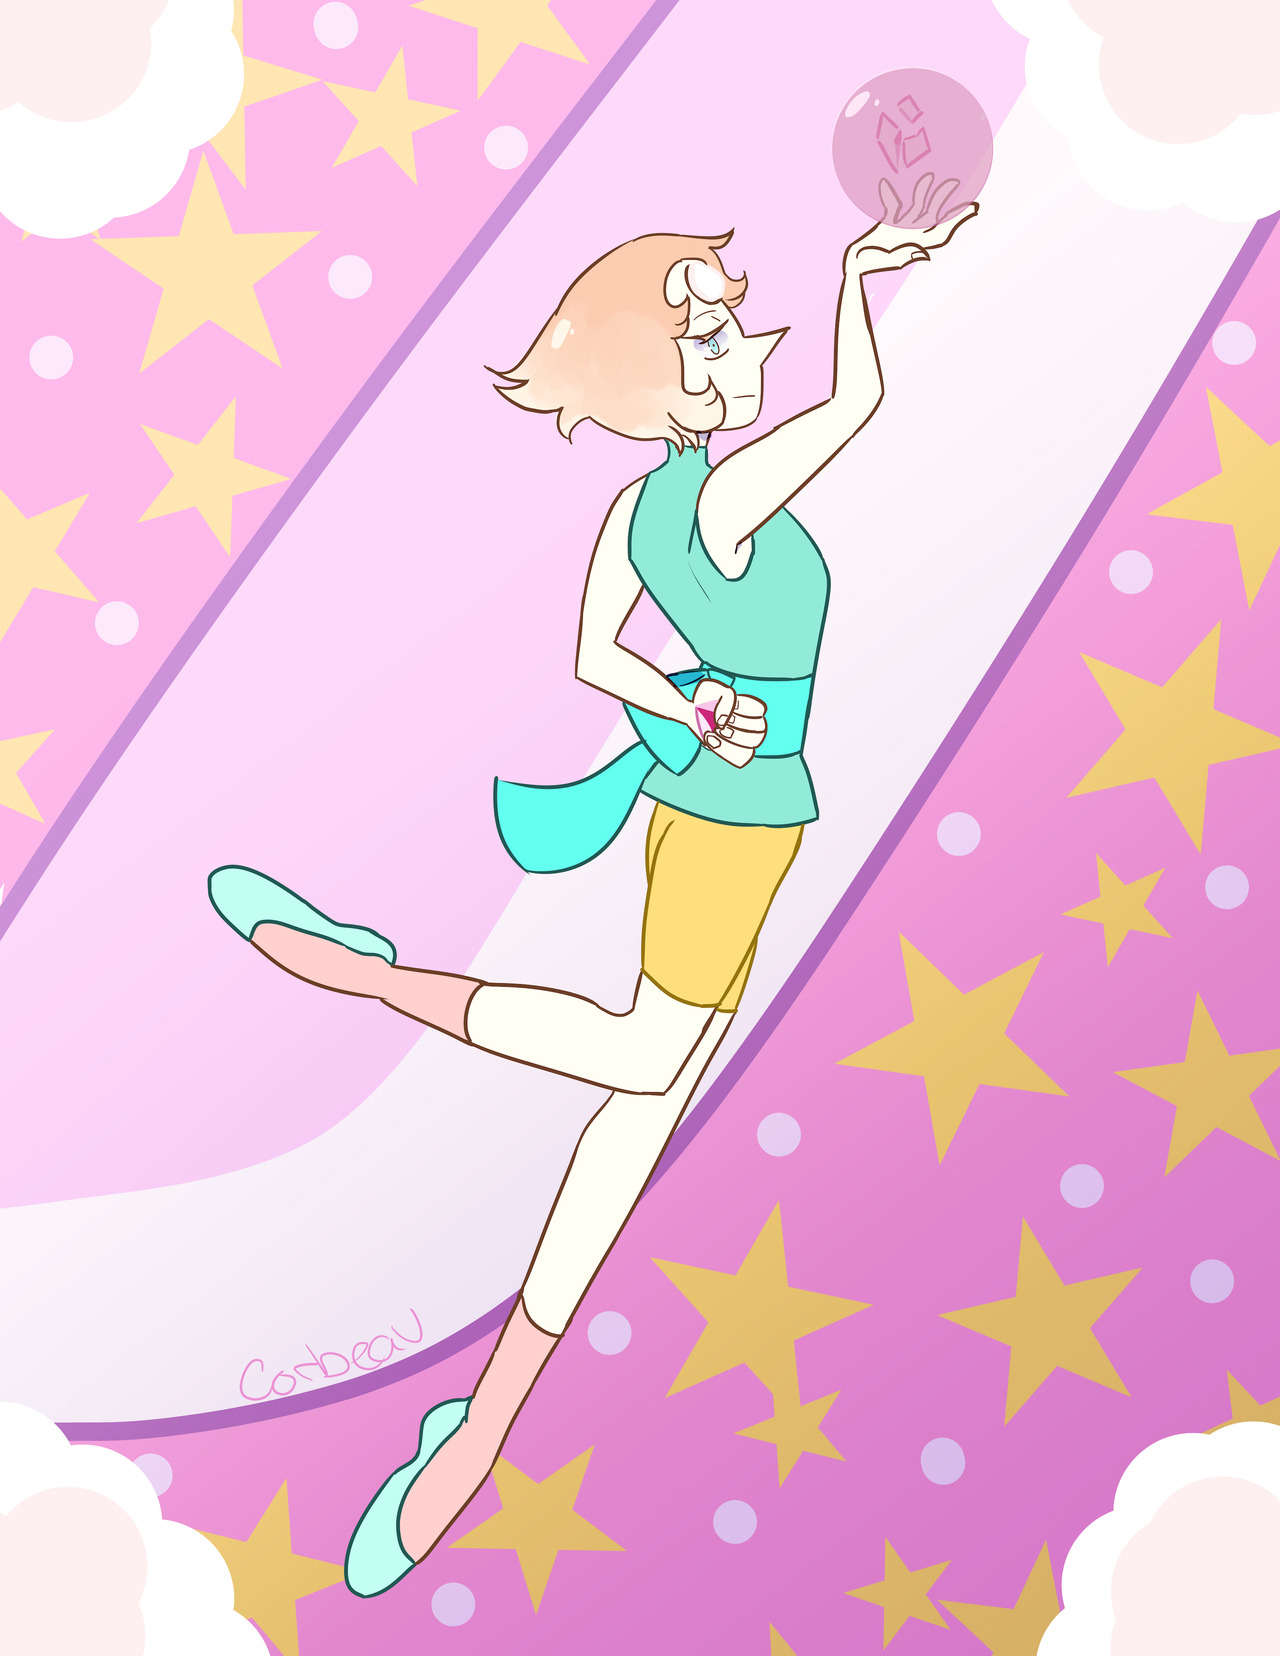 a pearl for my sister’s birthday!